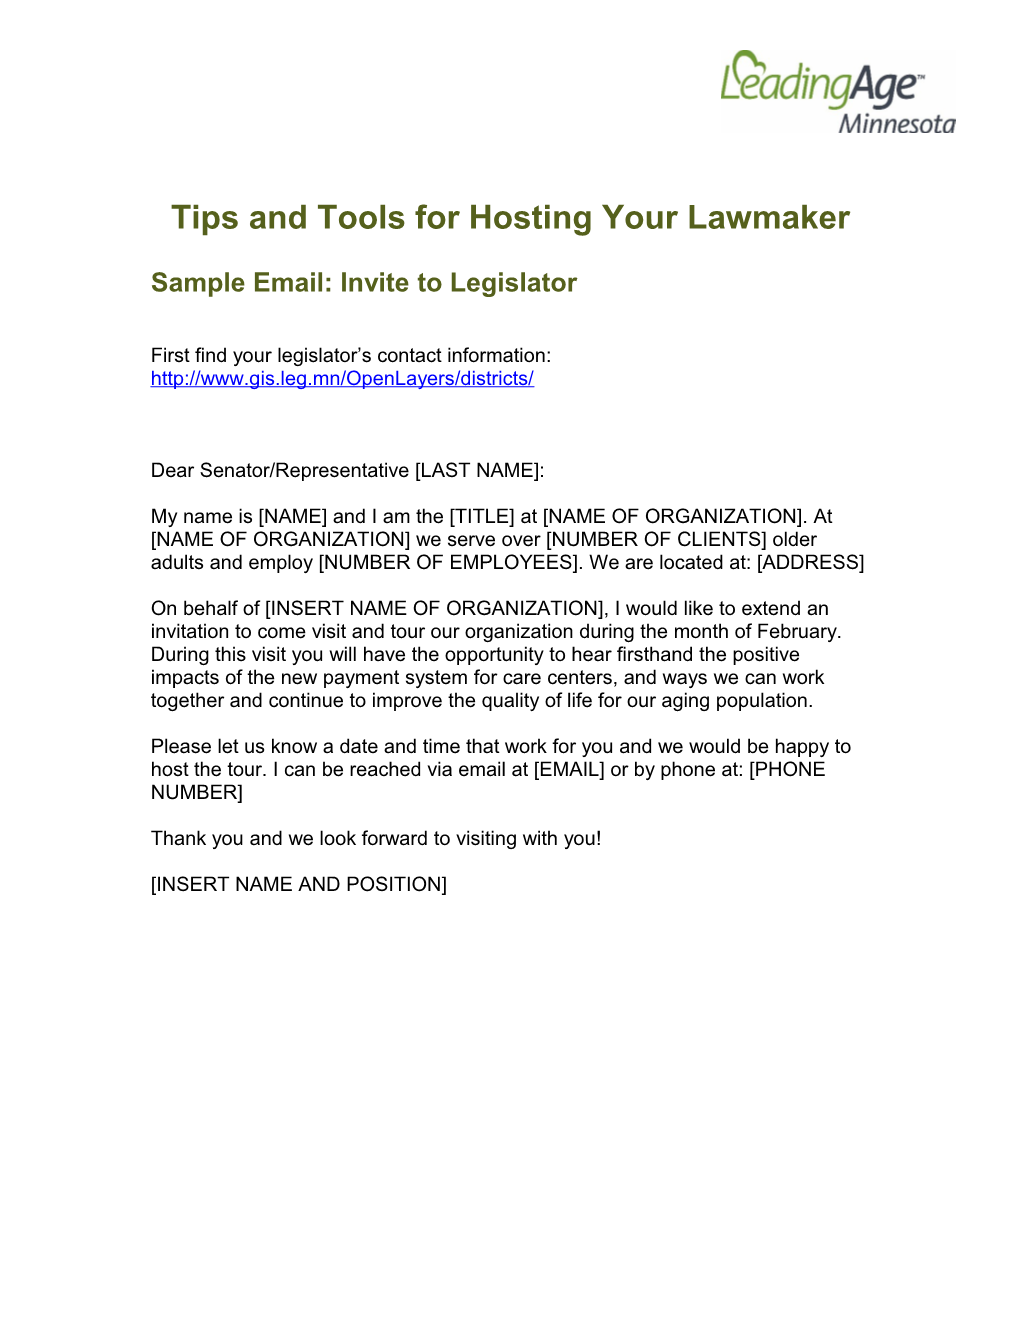 Tips and Tools for Hosting Your Lawmaker